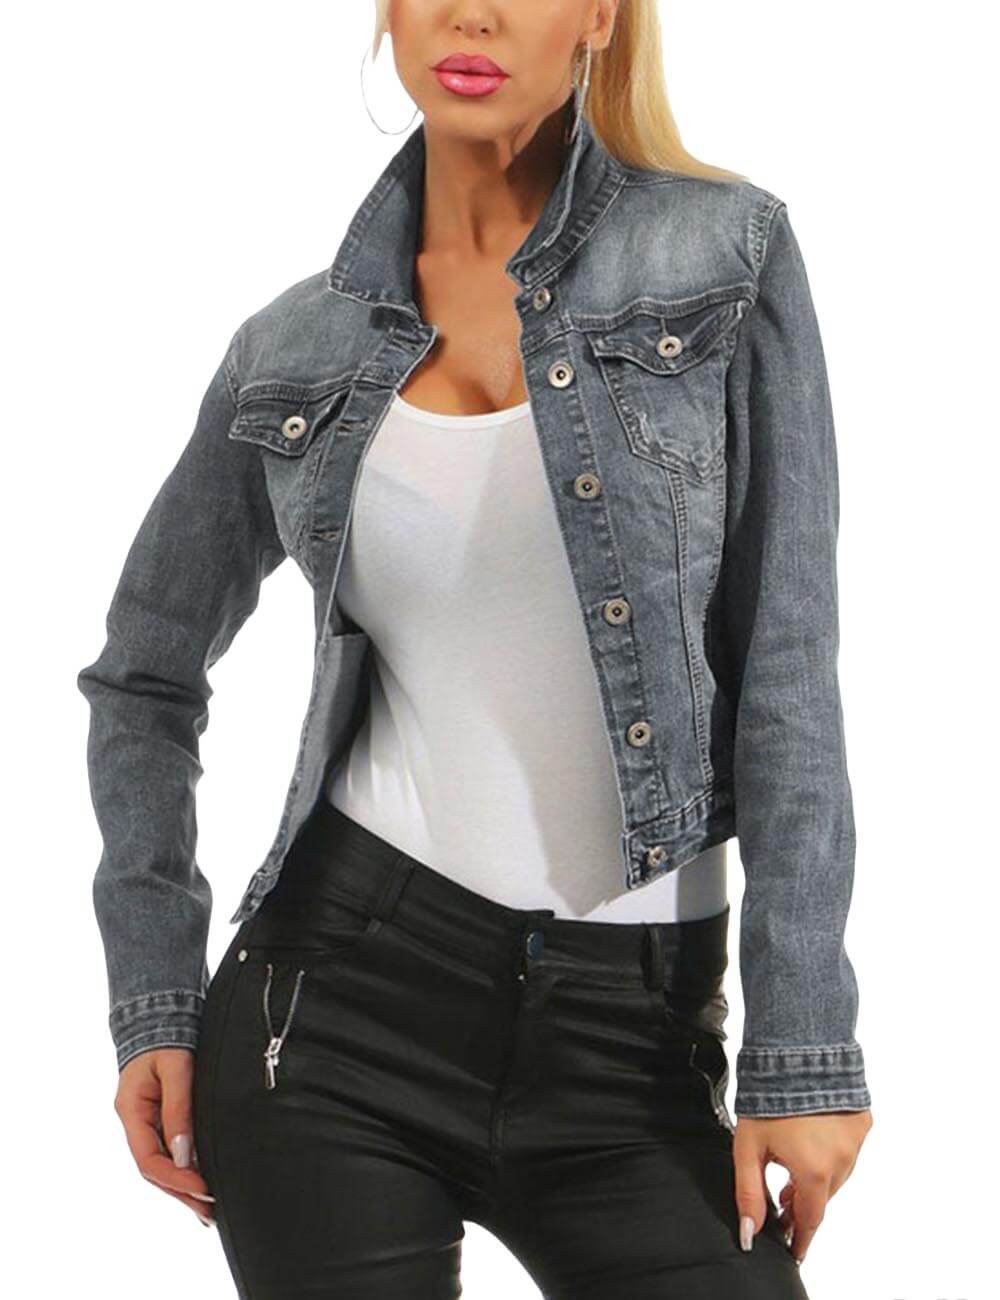  Women's Distressed Denim Jeans Outfits Coat Spring Fall Washed Jeans Outerwear Short  Denim Jacket (511GY-S)